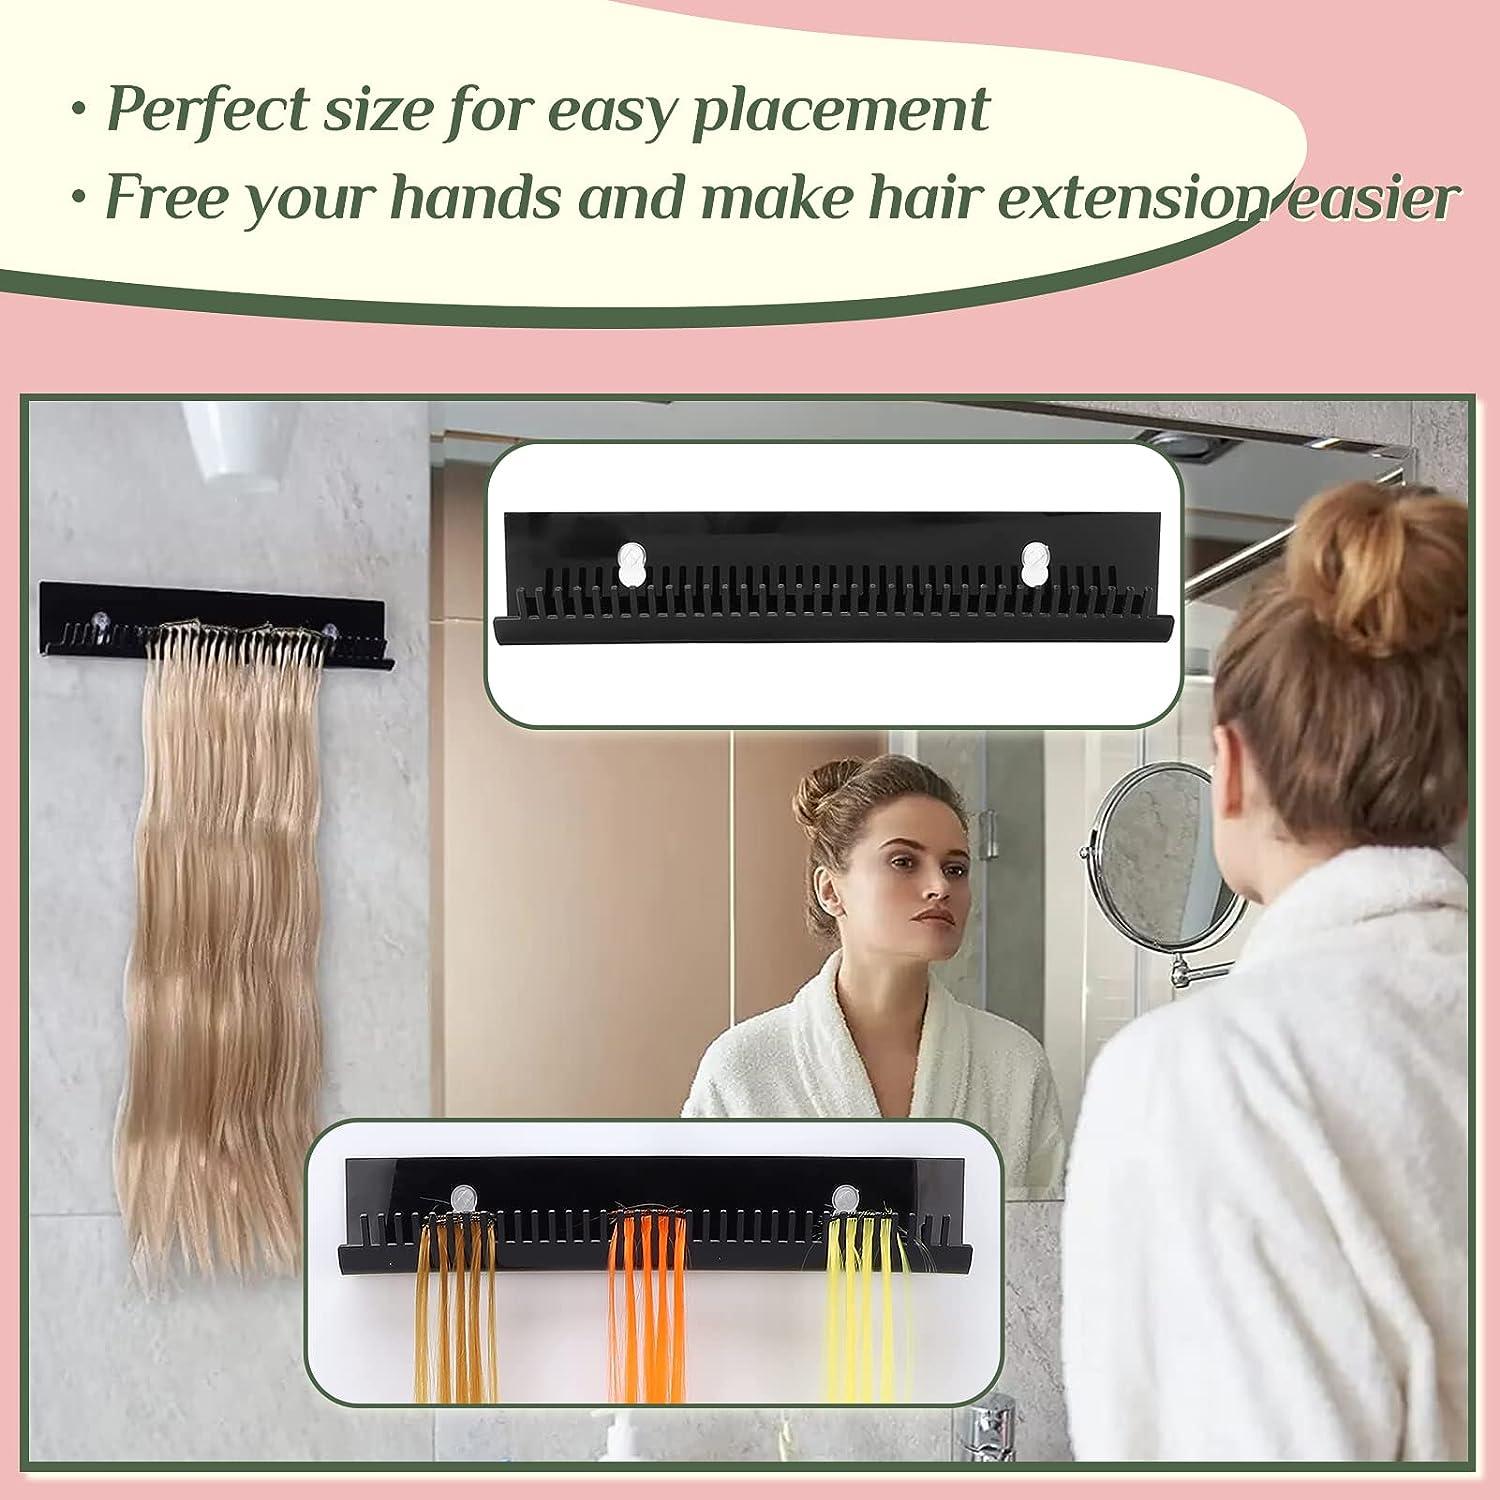 Slinsmei Black Hair Extensions Holder for Styling Professionally Designed  to Securely Hold Extra Wide Wefts including Hand Tied Wefts Wide Band Wefts  Beaded Wefts and Full Bundles 11.6 Inch (Pack of 1) Black